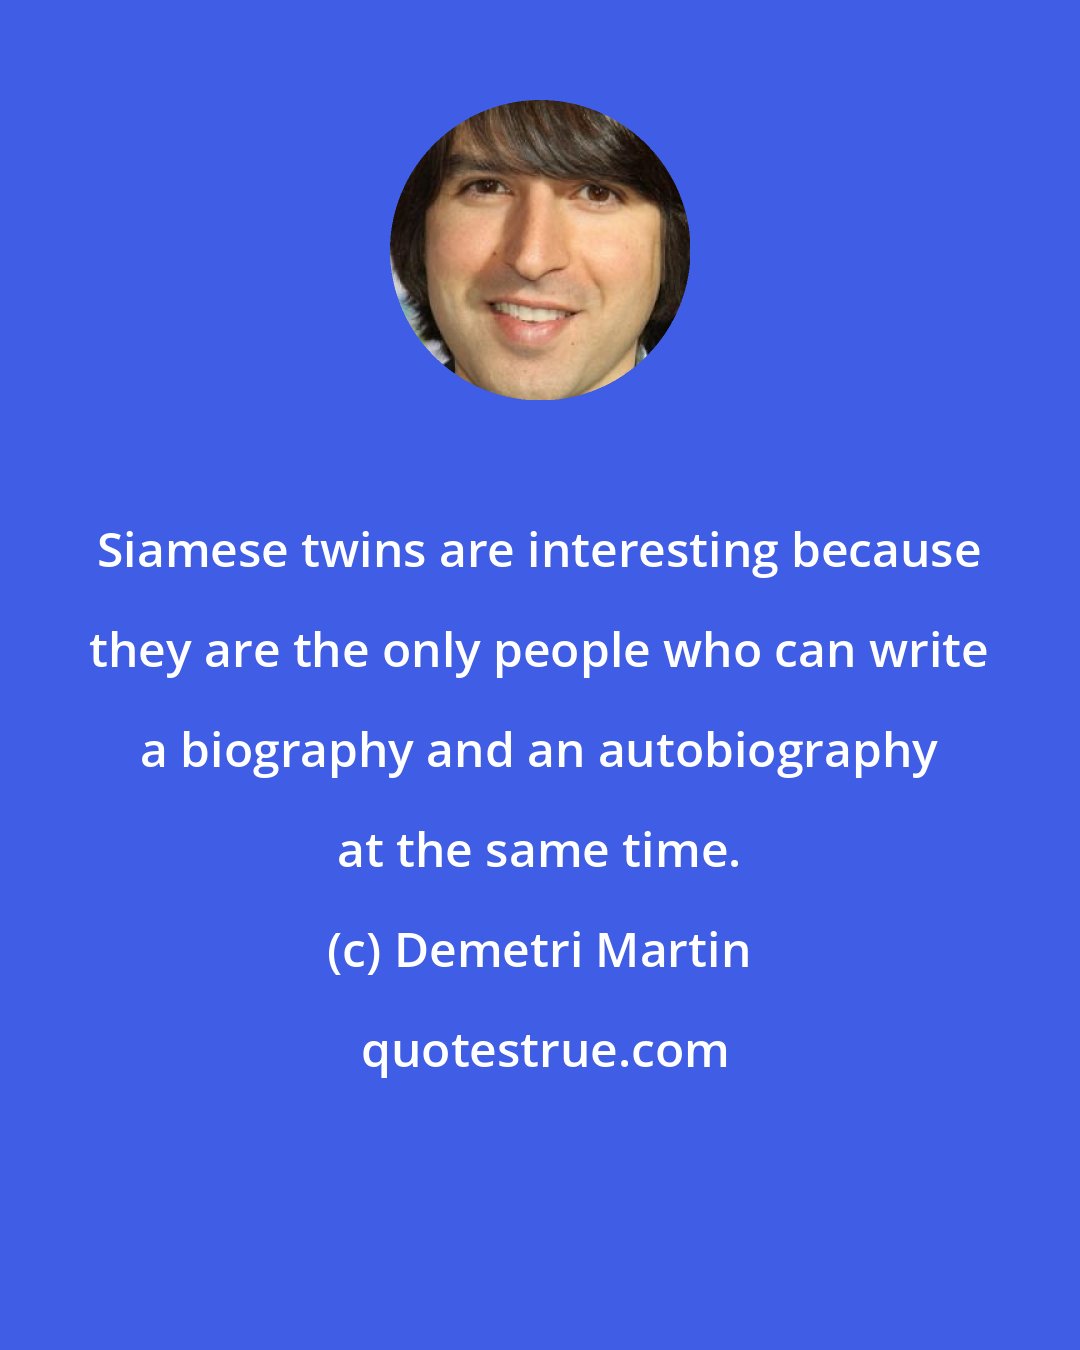 Demetri Martin: Siamese twins are interesting because they are the only people who can write a biography and an autobiography at the same time.